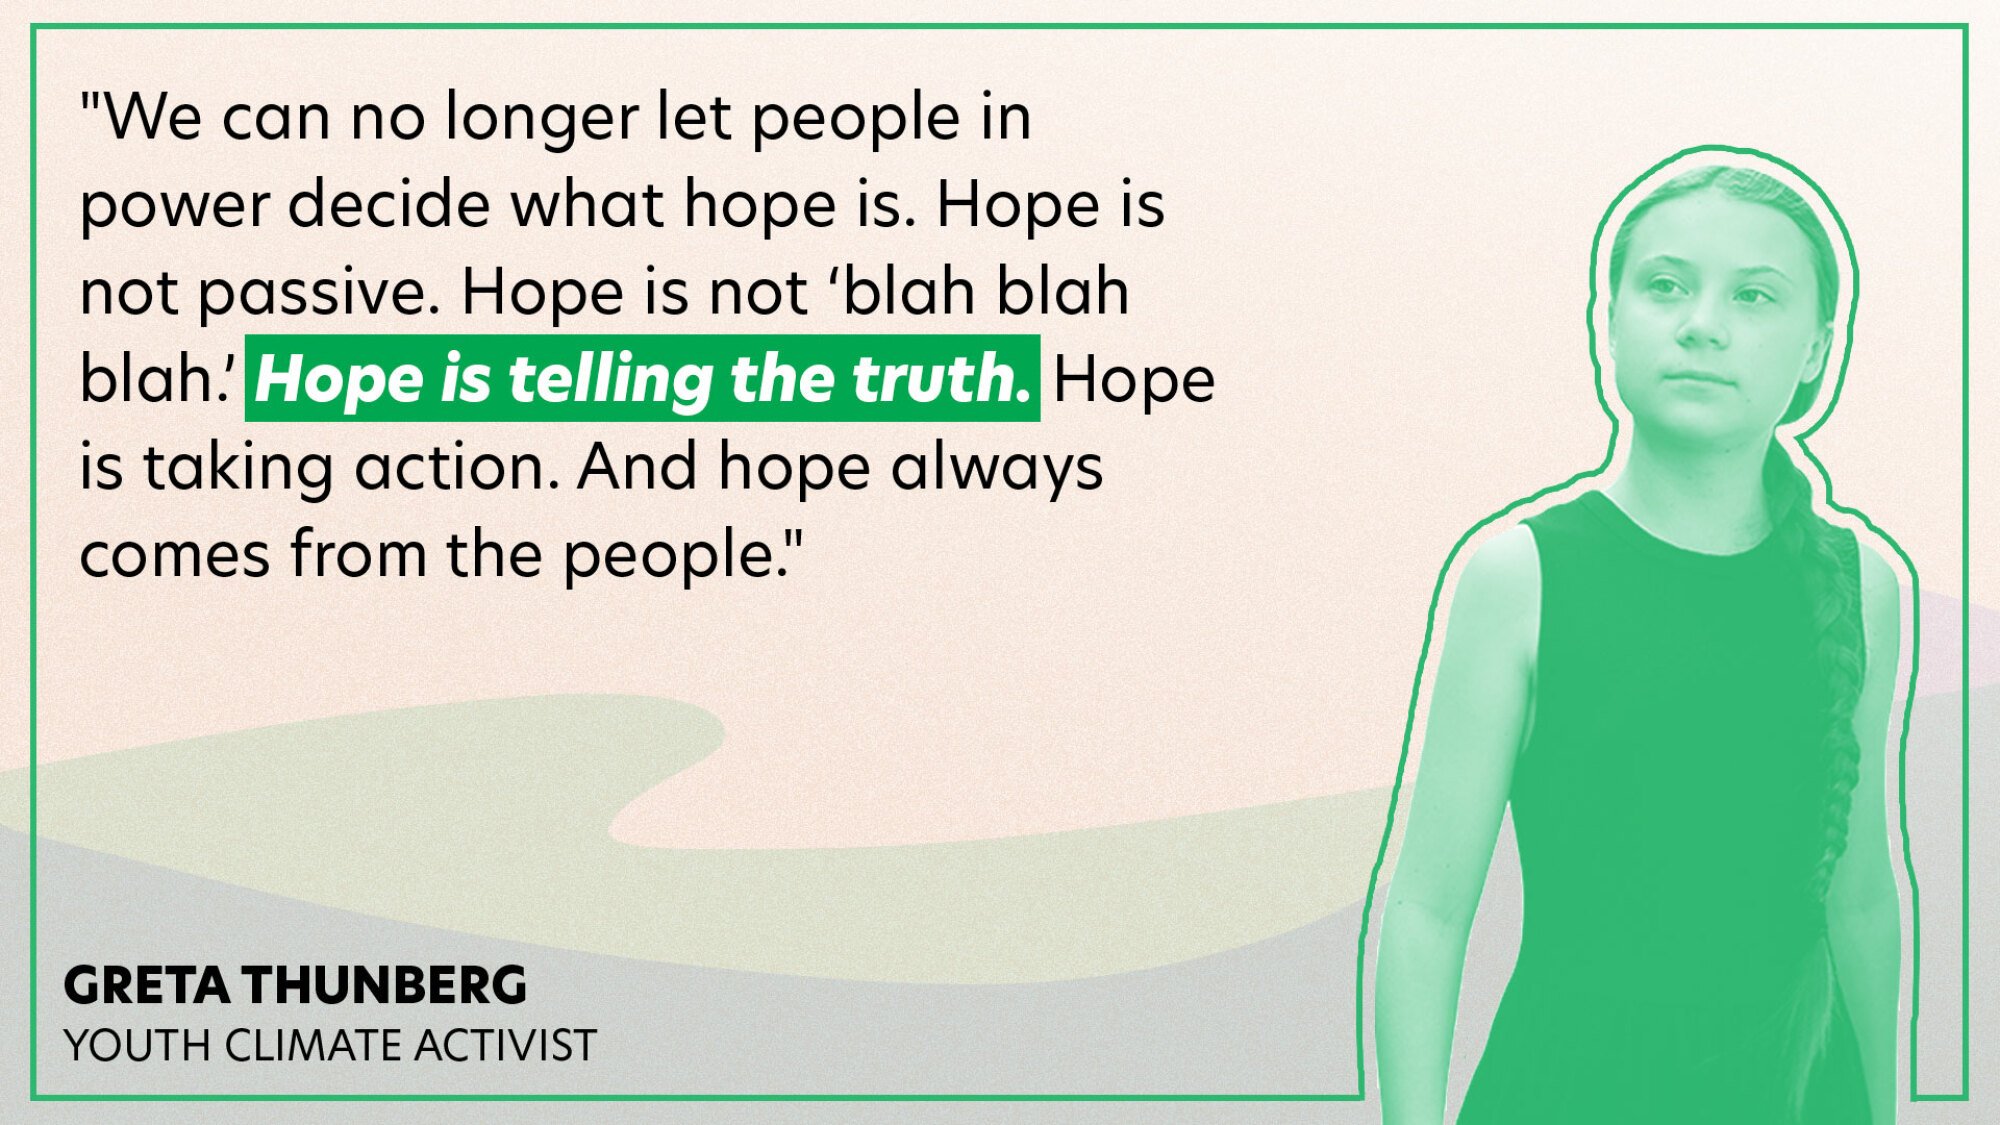 "We can no longer let people in power decide what hope is. Hope is not passive. Hope is not ‘blah blah blah.’ Hope is telling the truth. Hope is taking action. And hope always comes from the people." 